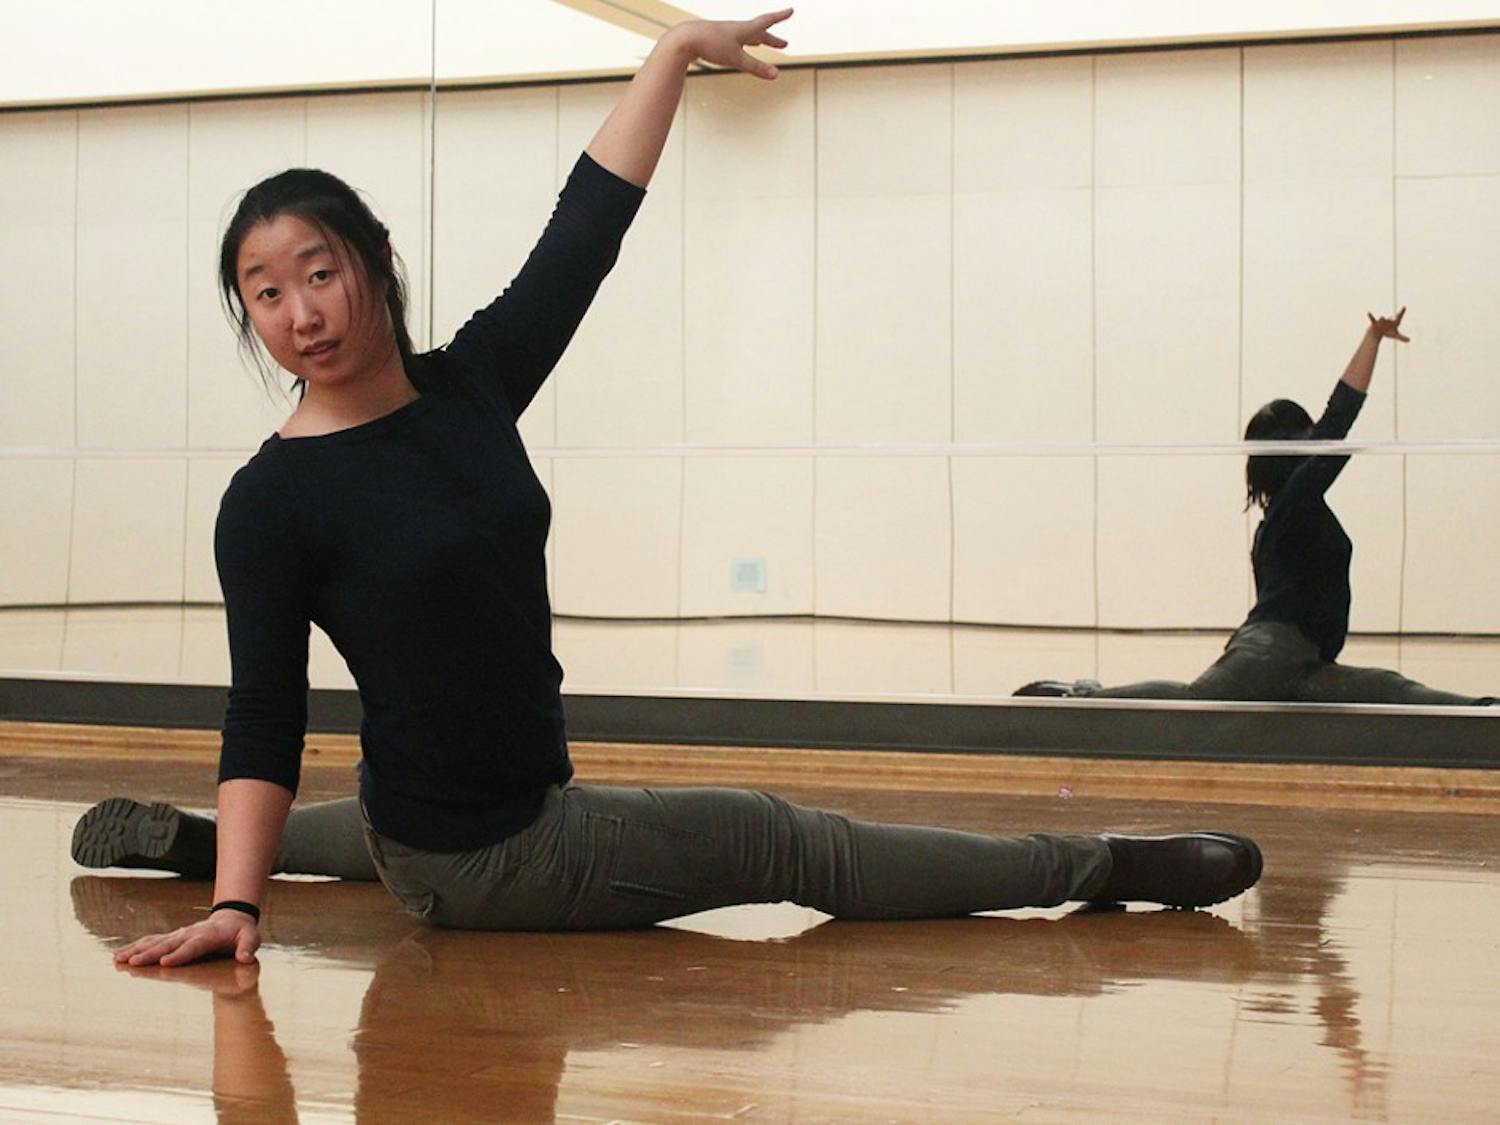 Wynton Wong is working on creating a documentary and web series focused on dance clubs and opportunities at UNC. Their final aim is to create a dance minor before Chancellor Holden Thorpe retires.